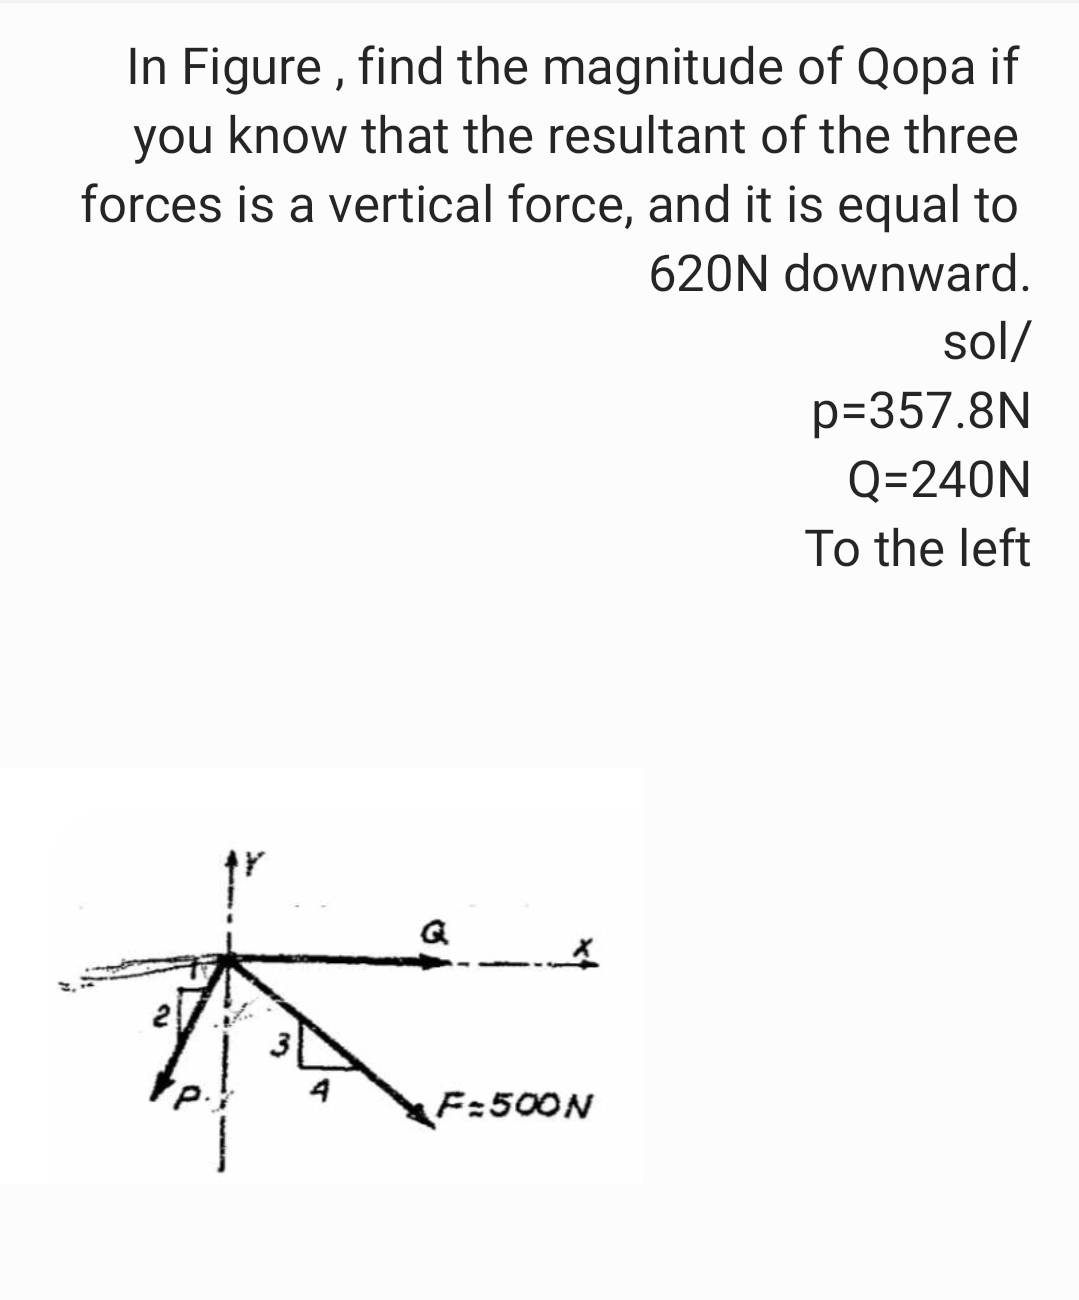 In Figure, find the magnitude of Qopa if
you know that the resultant of the three
forces is a vertical force, and it is equal to
620N downward.
sol/
p=357.8N
Q=240N
To the left
Q
K
4
2
F=500N